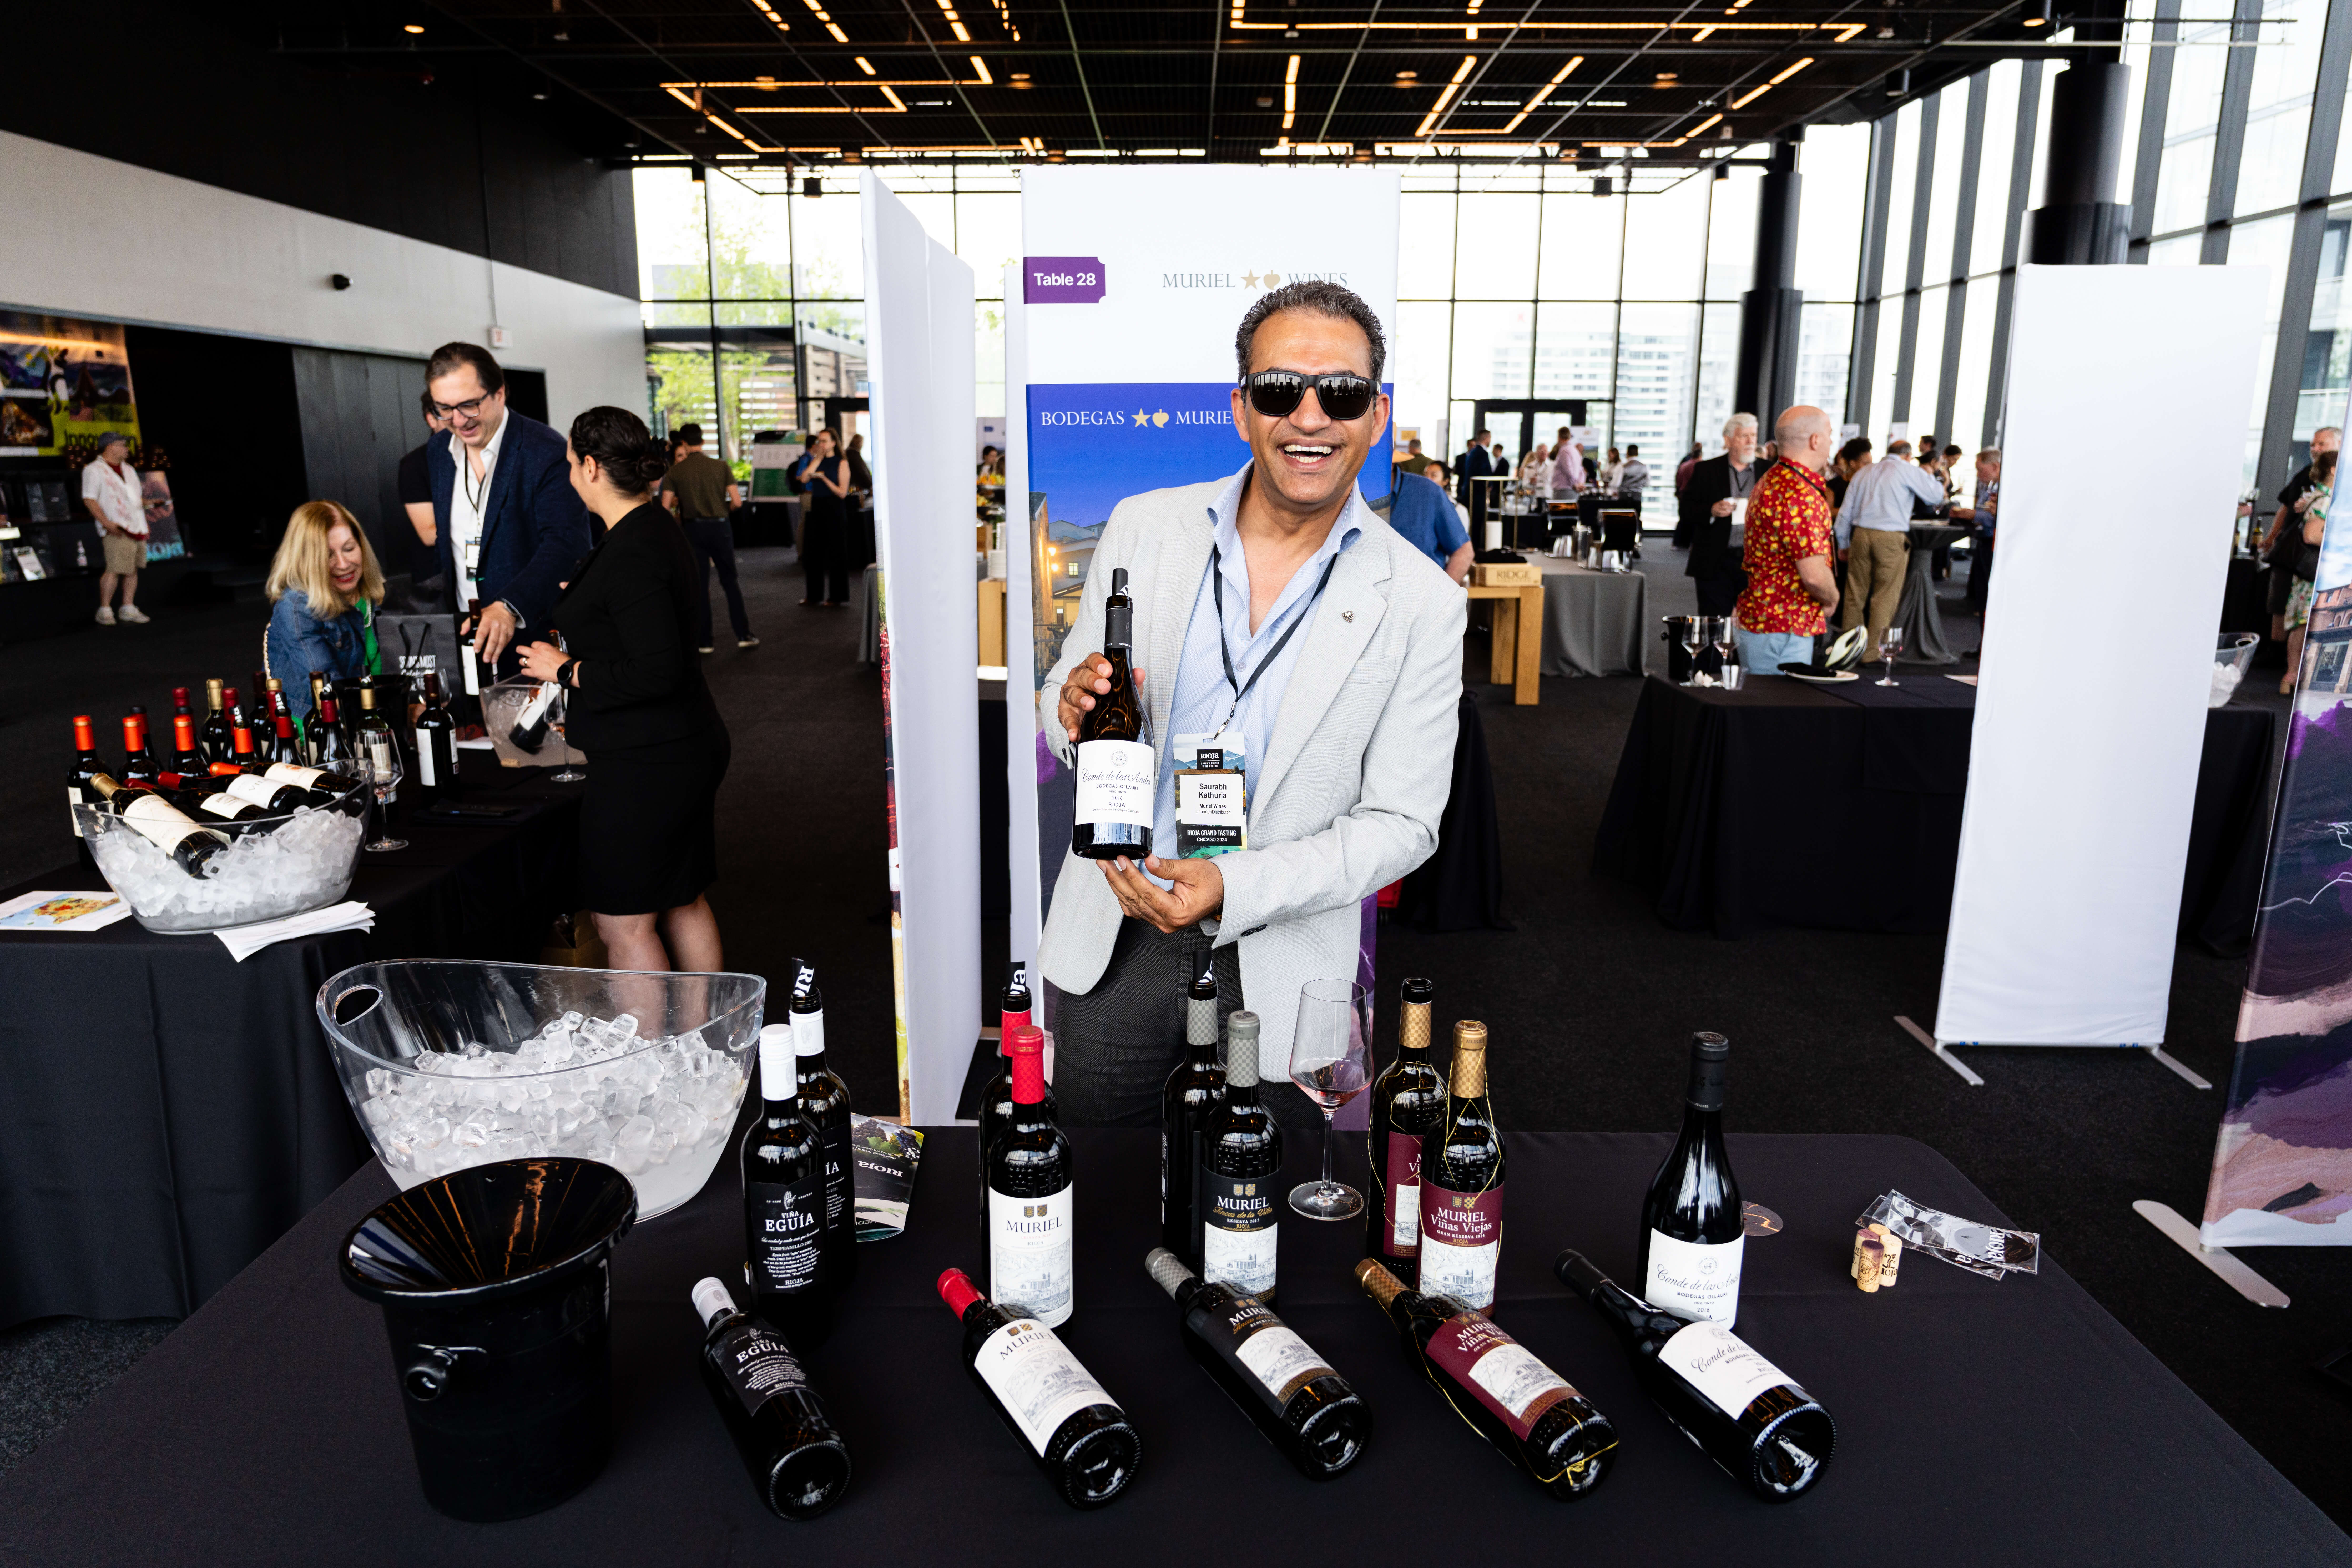 A man is smiling in sunglasses as he shows a bottle of red wine while stands at a table display